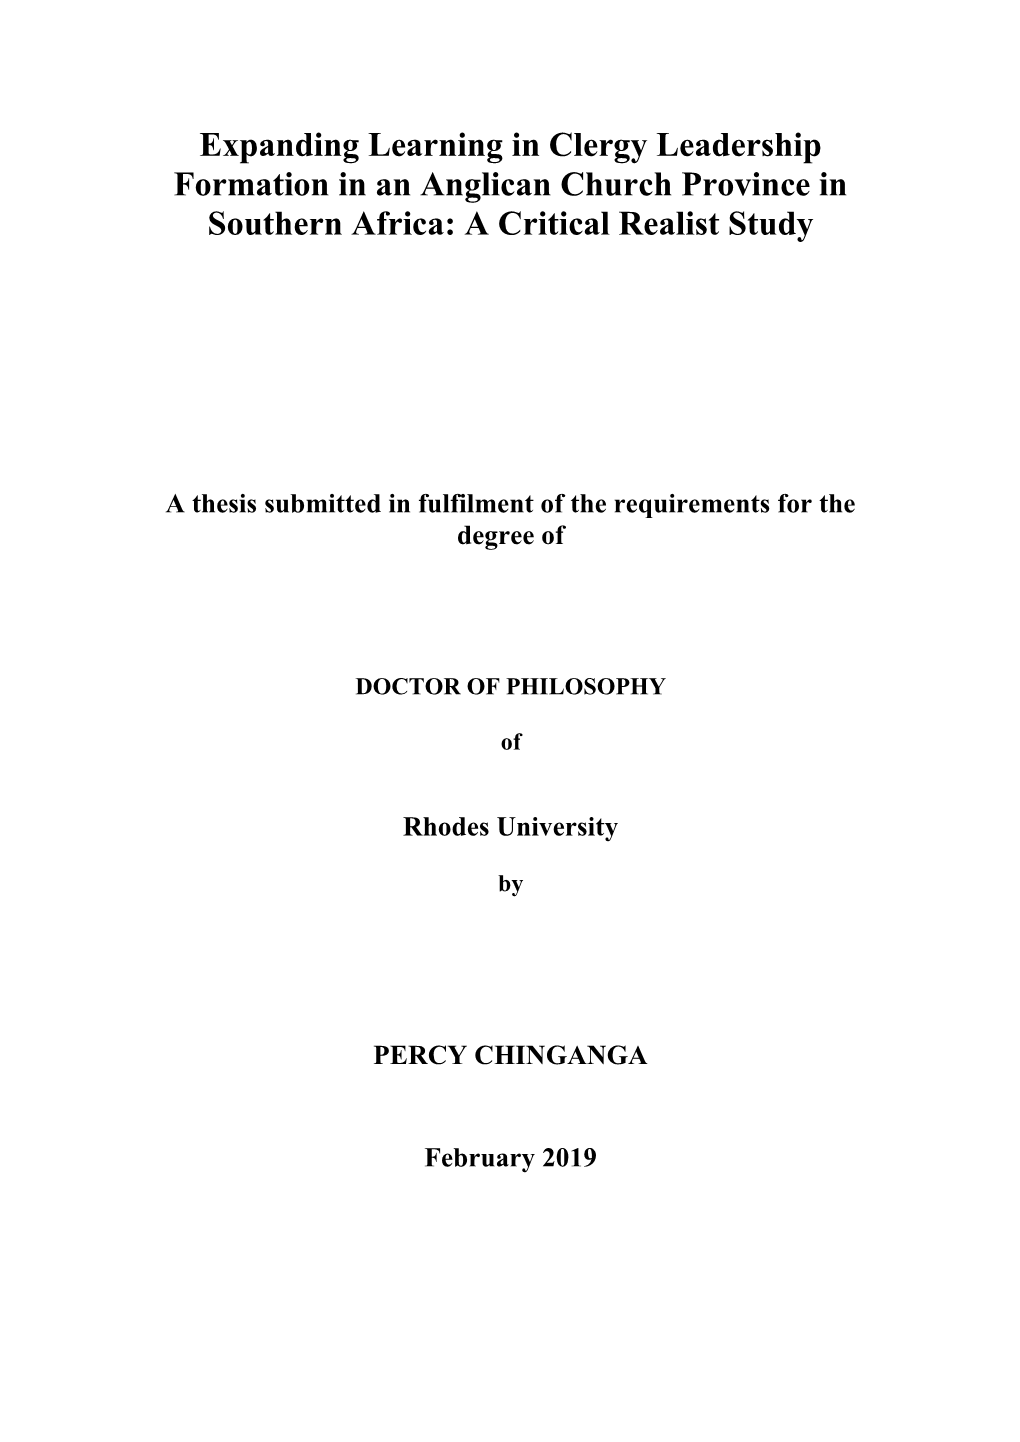 Expanding Learning in Clergy Leadership Formation in an Anglican Church Province in Southern Africa: a Critical Realist Study